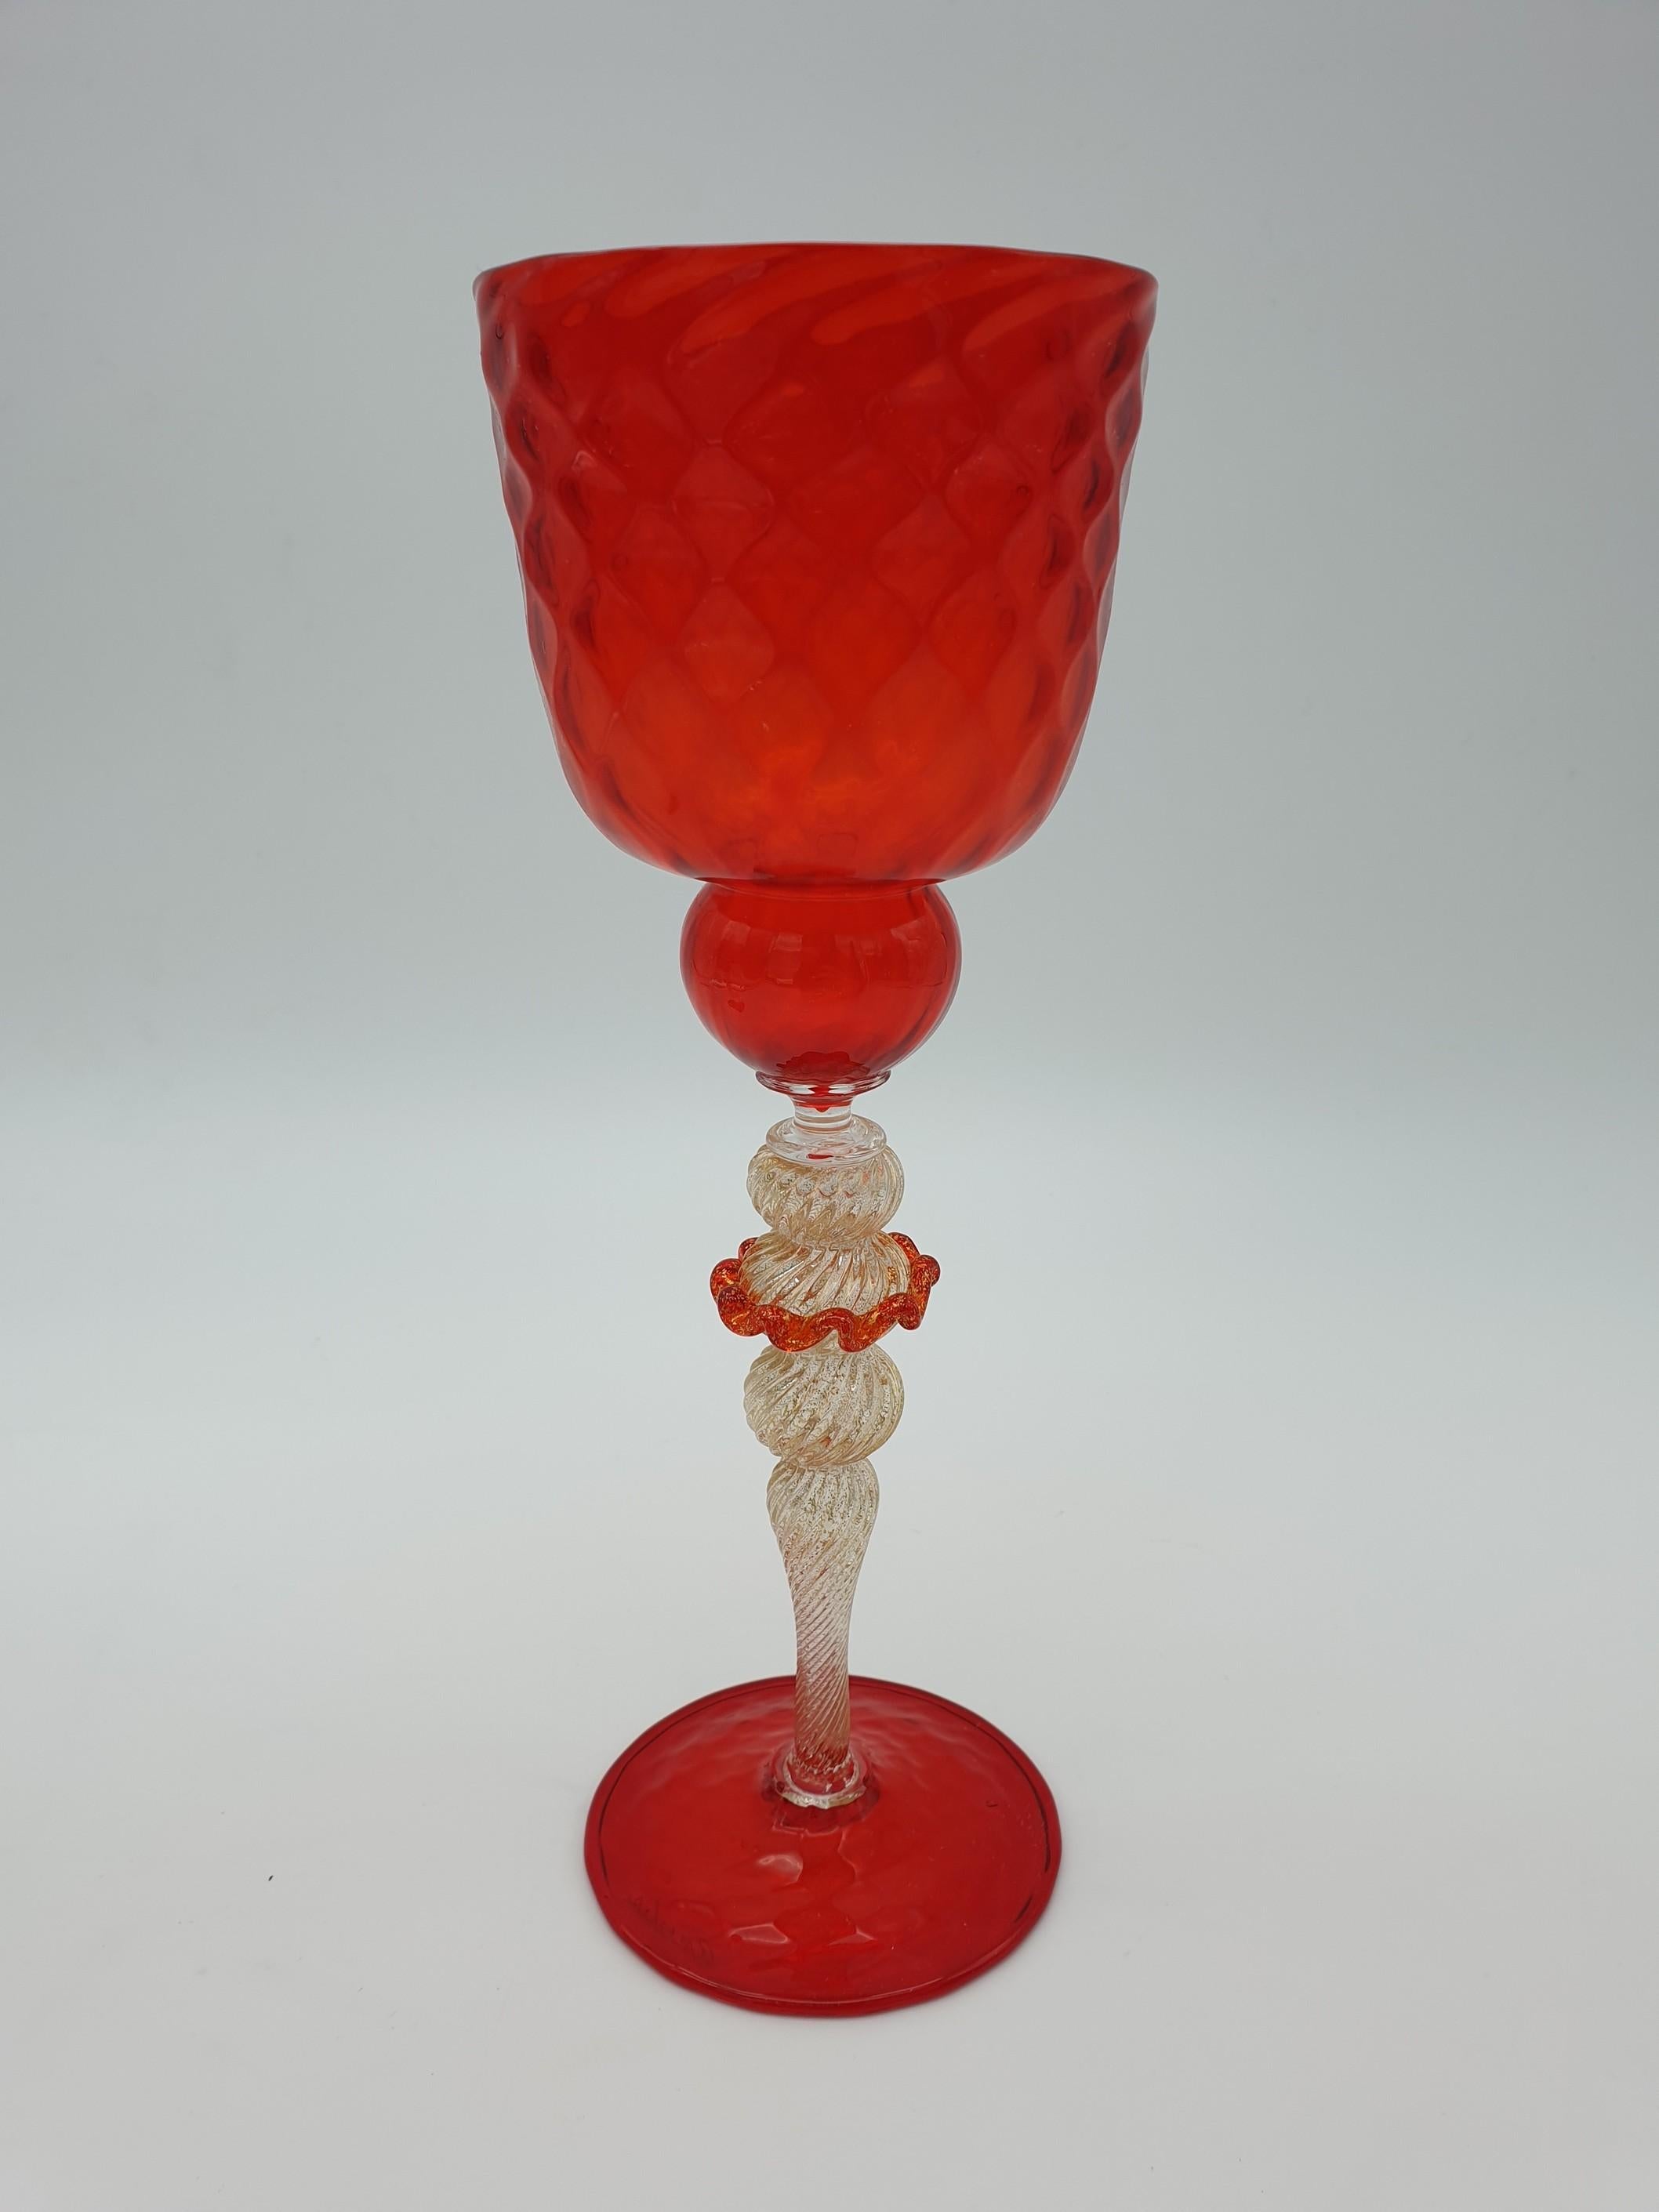 Italian Pair of Modern Murano Glass Goblets by Gino Cenedese, Red & Amethyst, Late 1990s For Sale